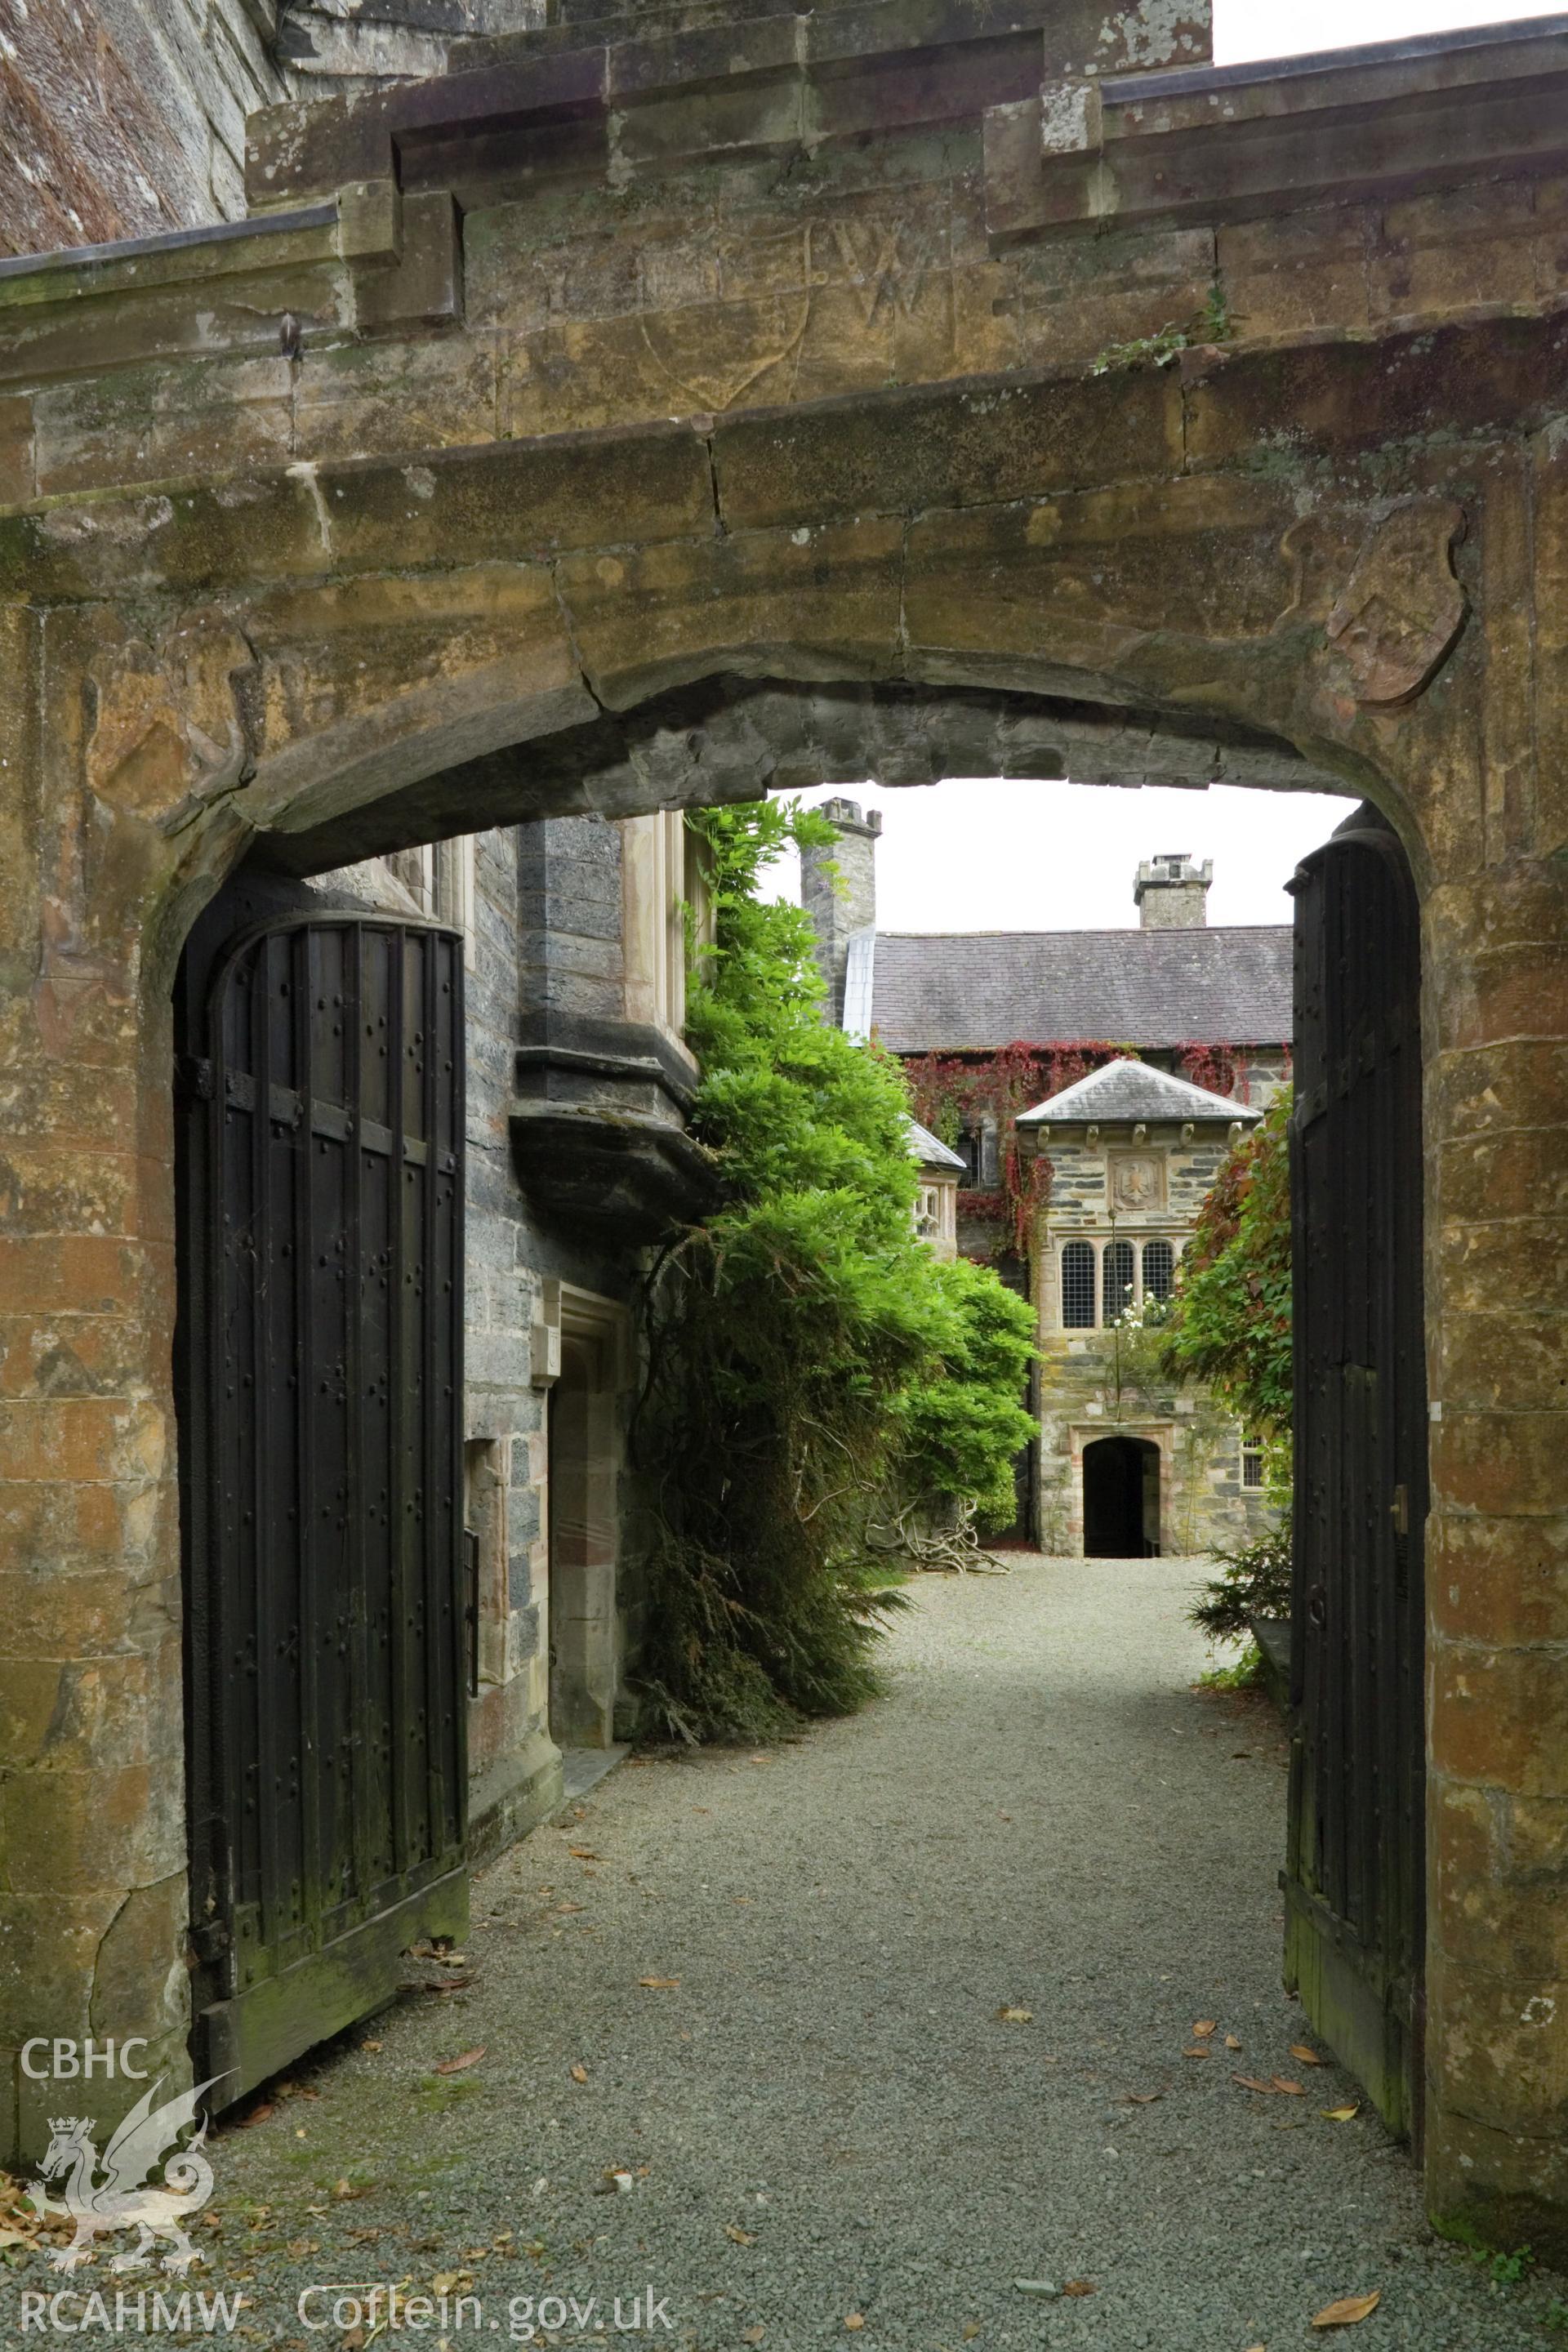 House viewed through entrance gate from the southwest.